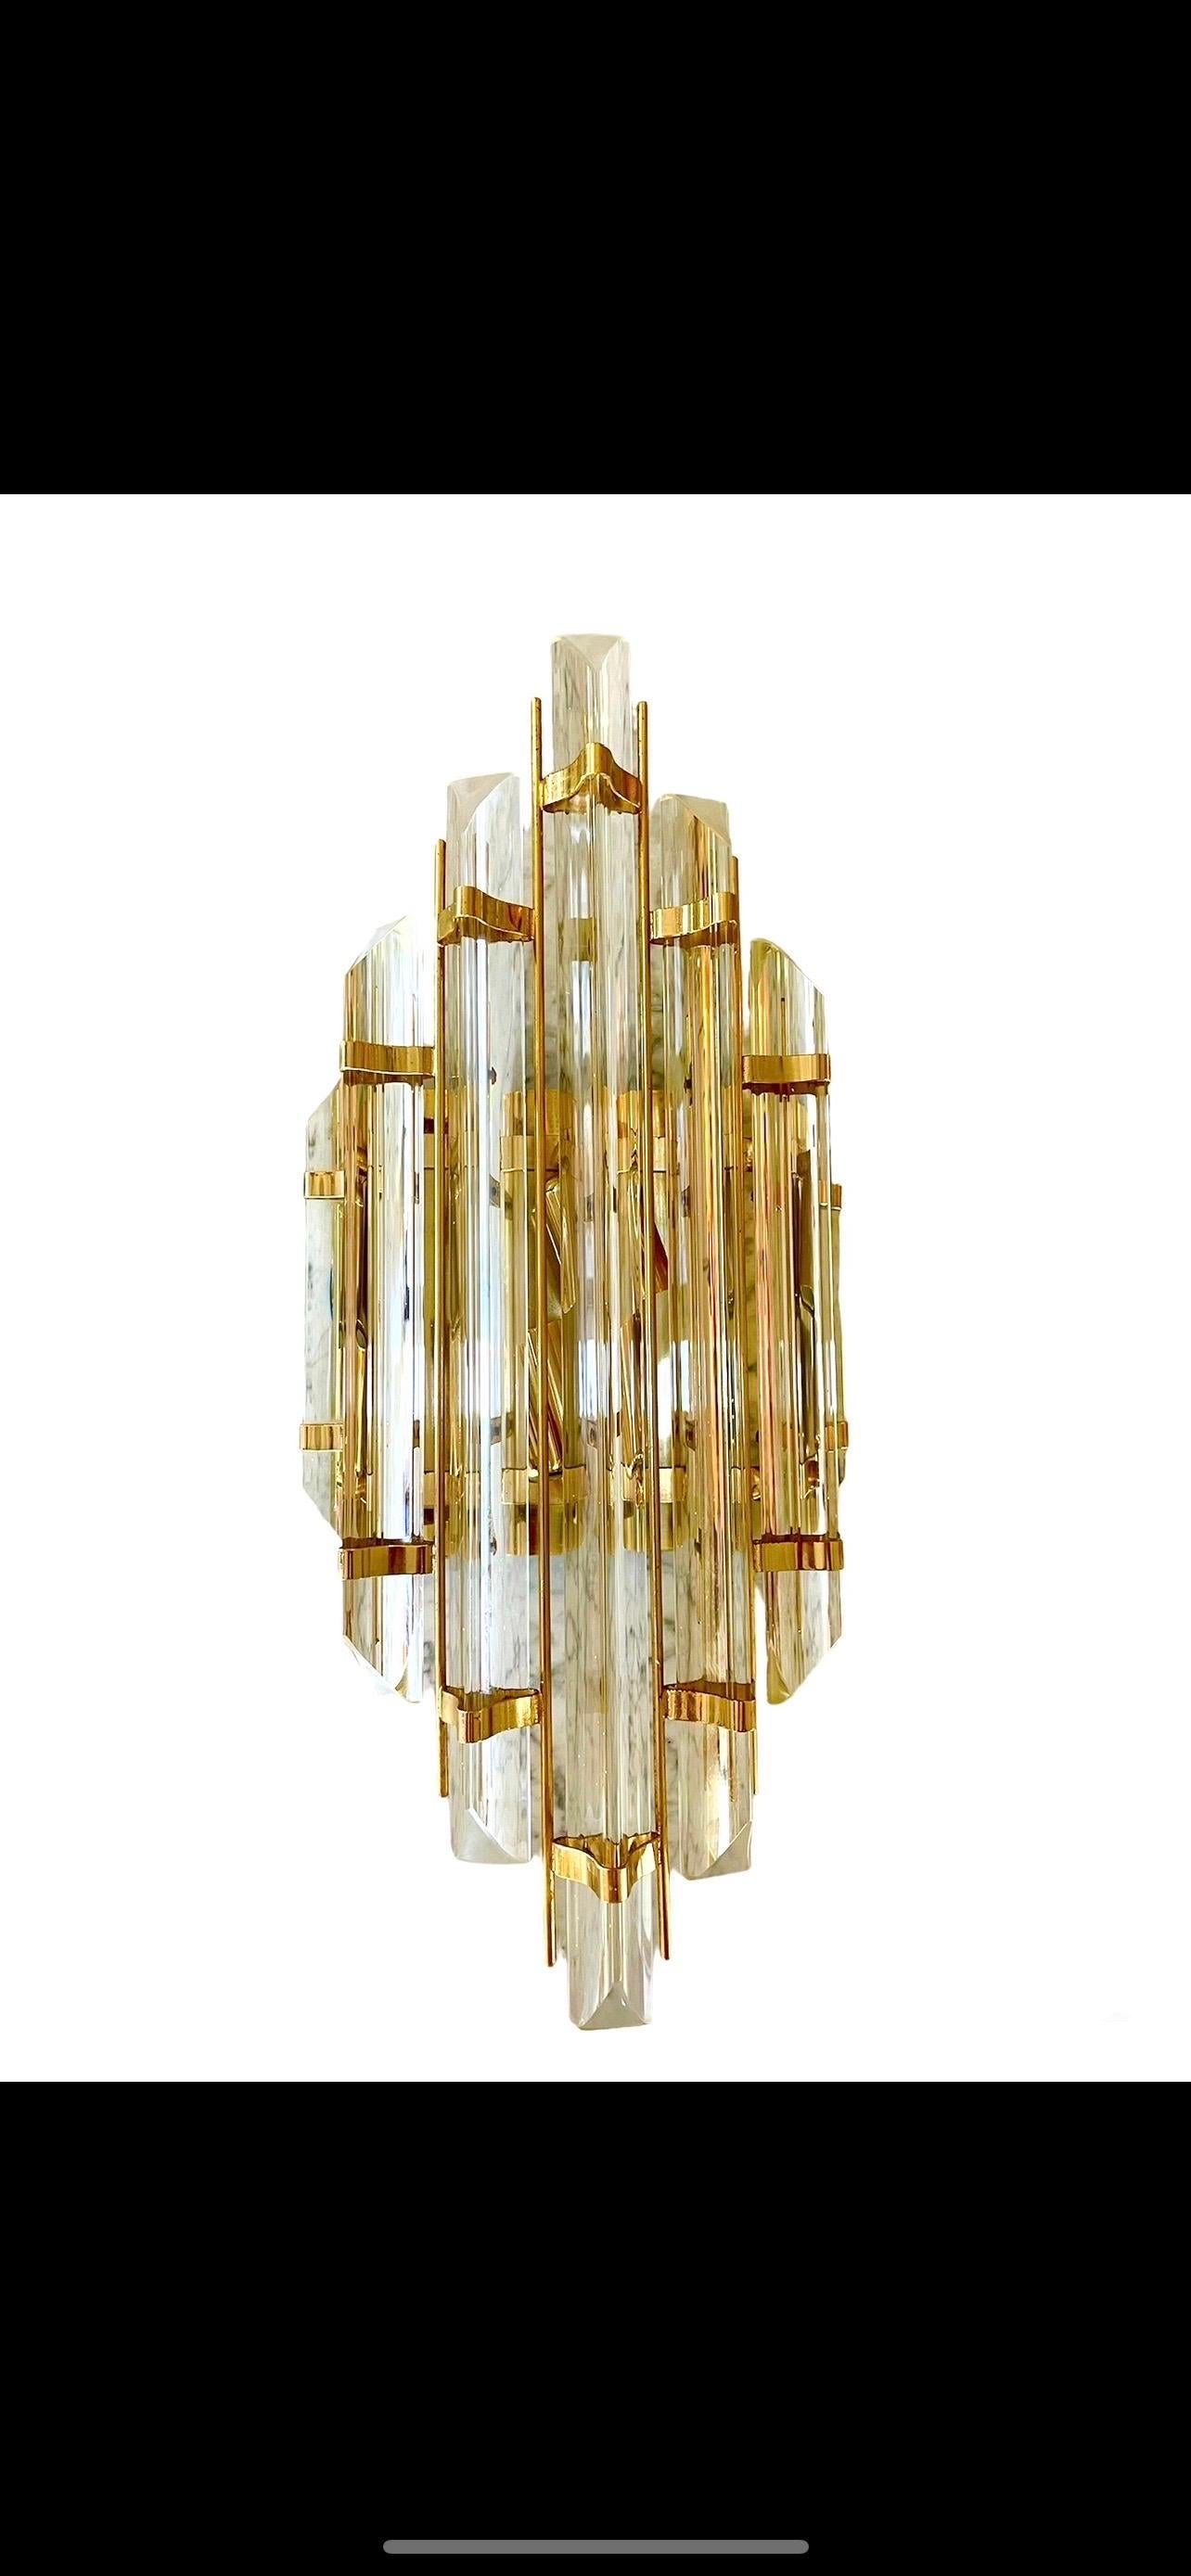 Venini wall lamp in Murano glass with iridium glass. The design and the quality of the glass make this piece the best in design.
This pair of sconces is in good condition.
Venini is an Italian company known for its high quality handcrafted lighting.